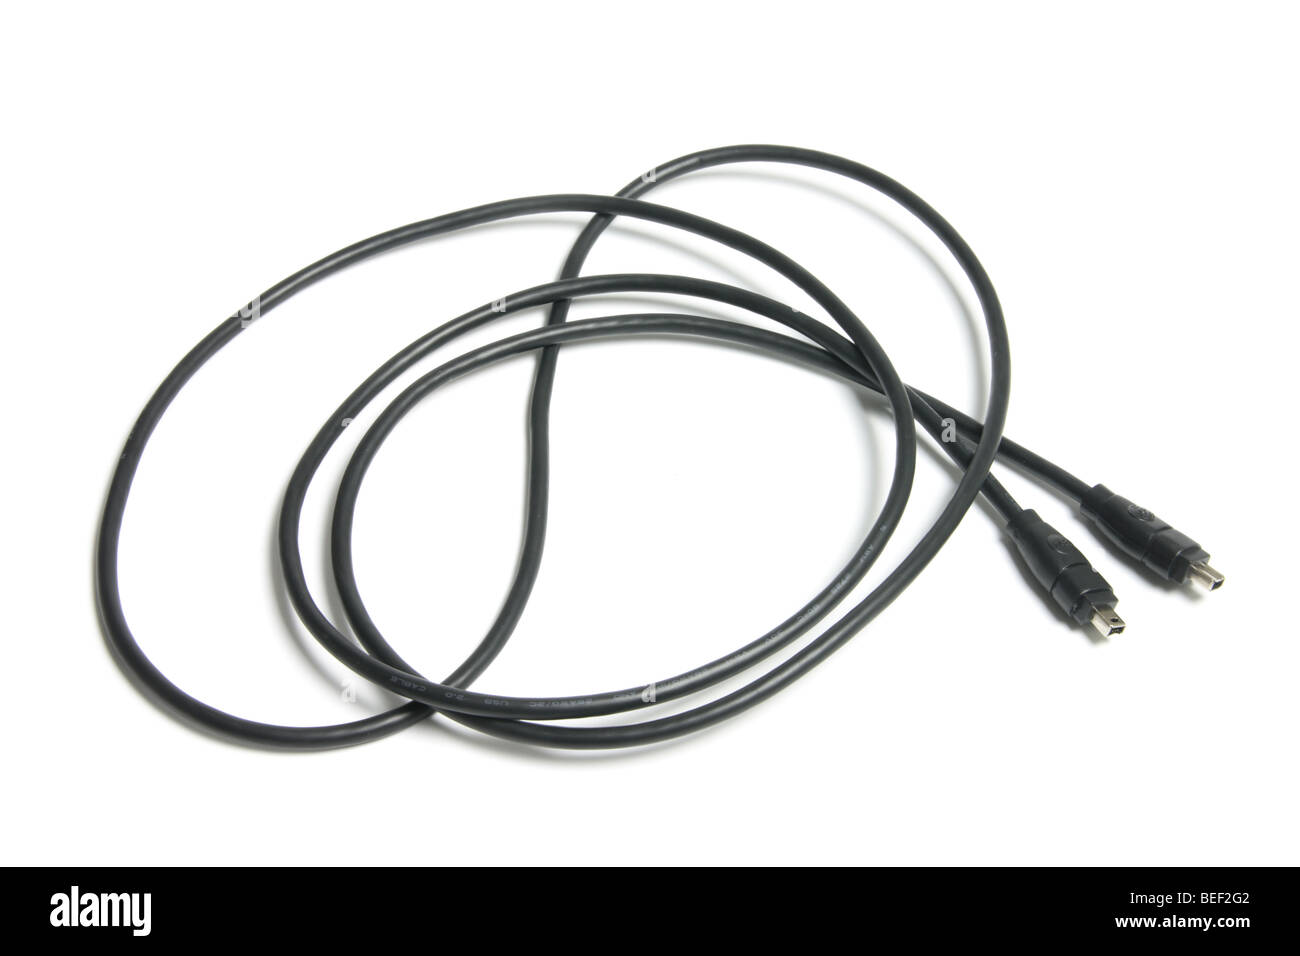 Firewire Cable Stock Photo